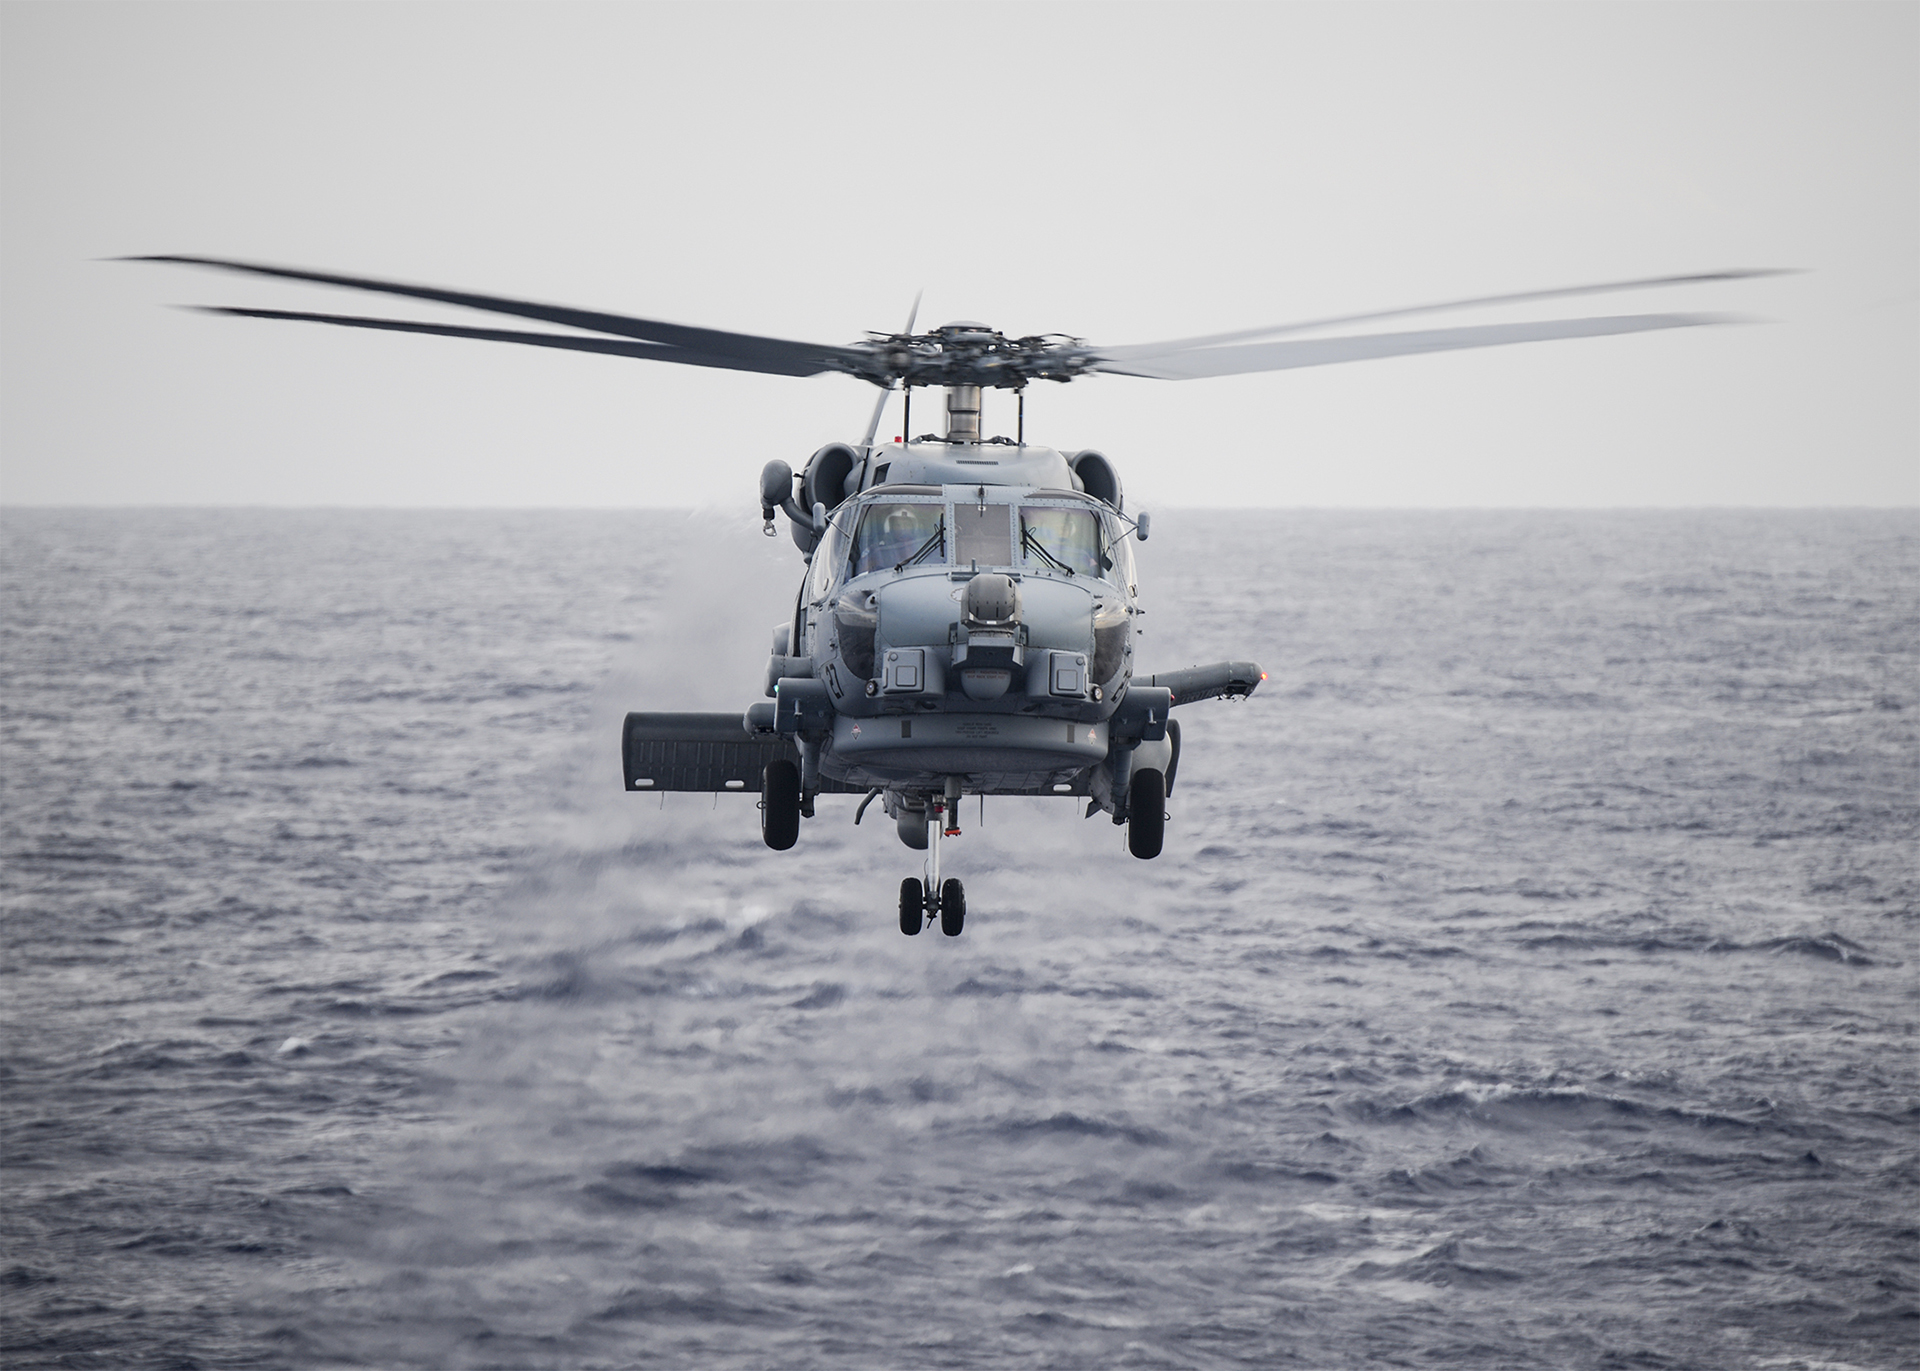 MH-60R helicopter